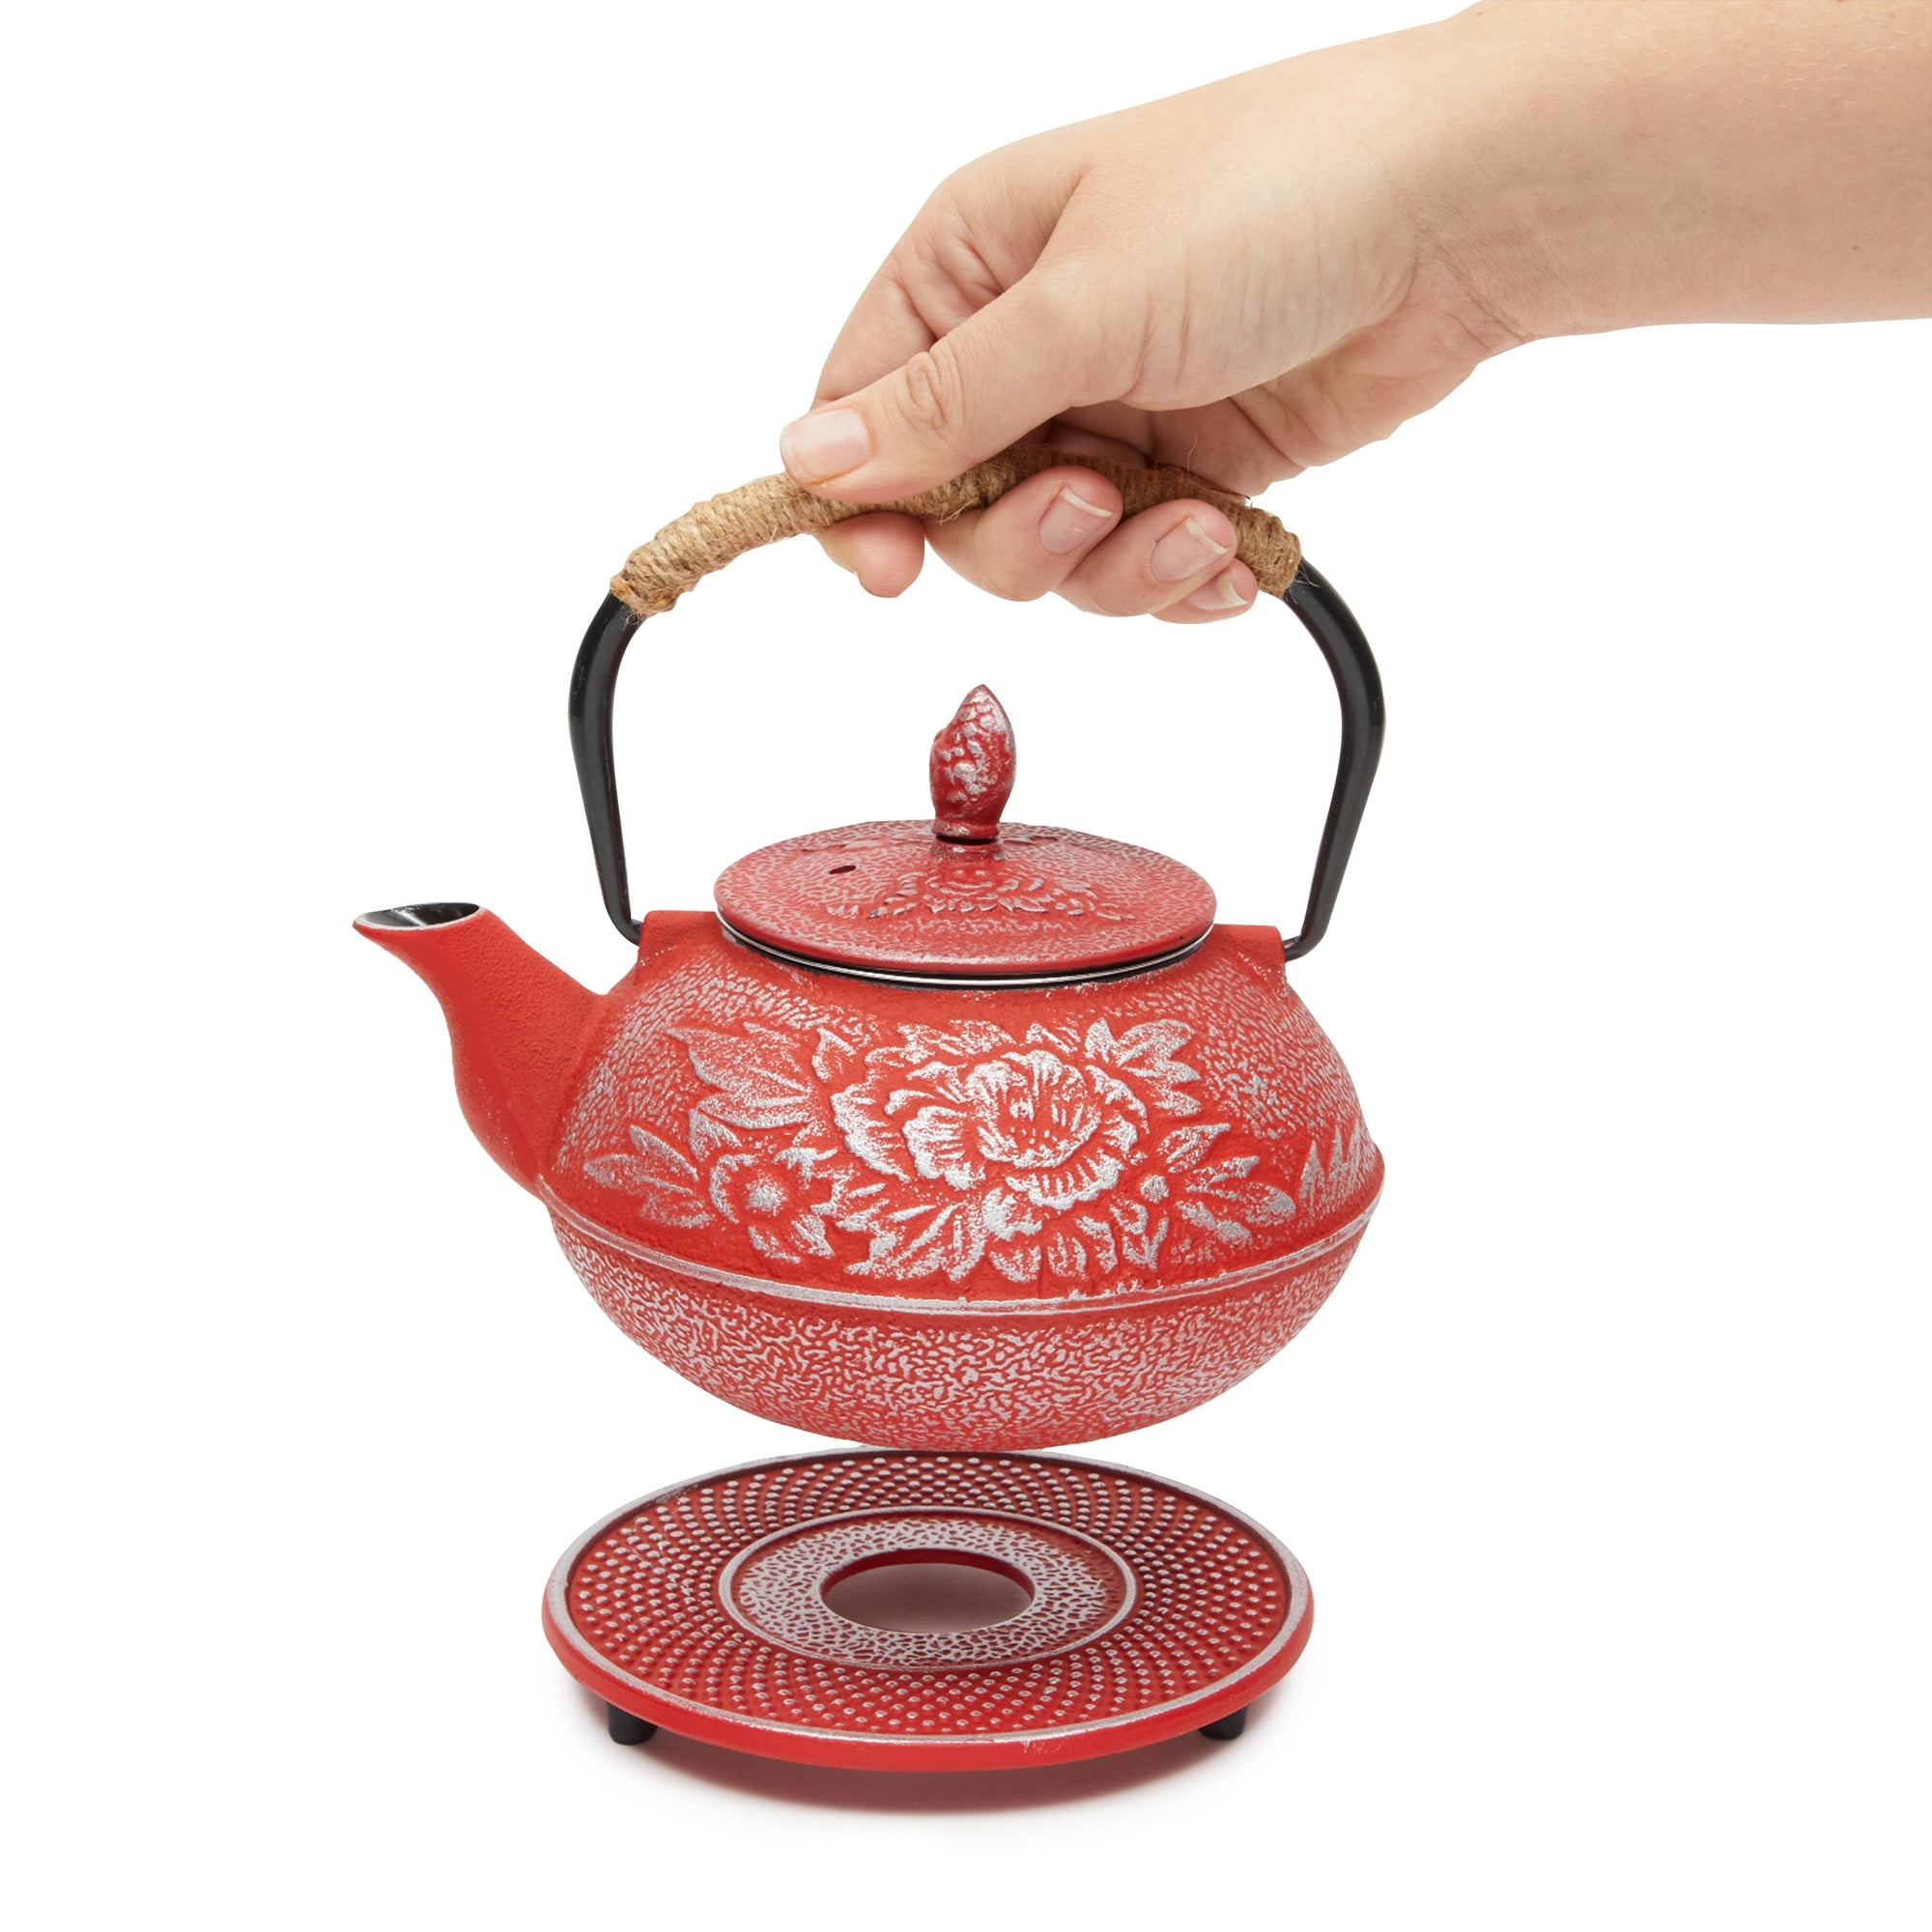 Tetsubin Cast Iron Tea Pot, brewing some Jasmine. Never used a cast iron tea  pot, the little placard that came with the set claims it can be used over a  fire. If